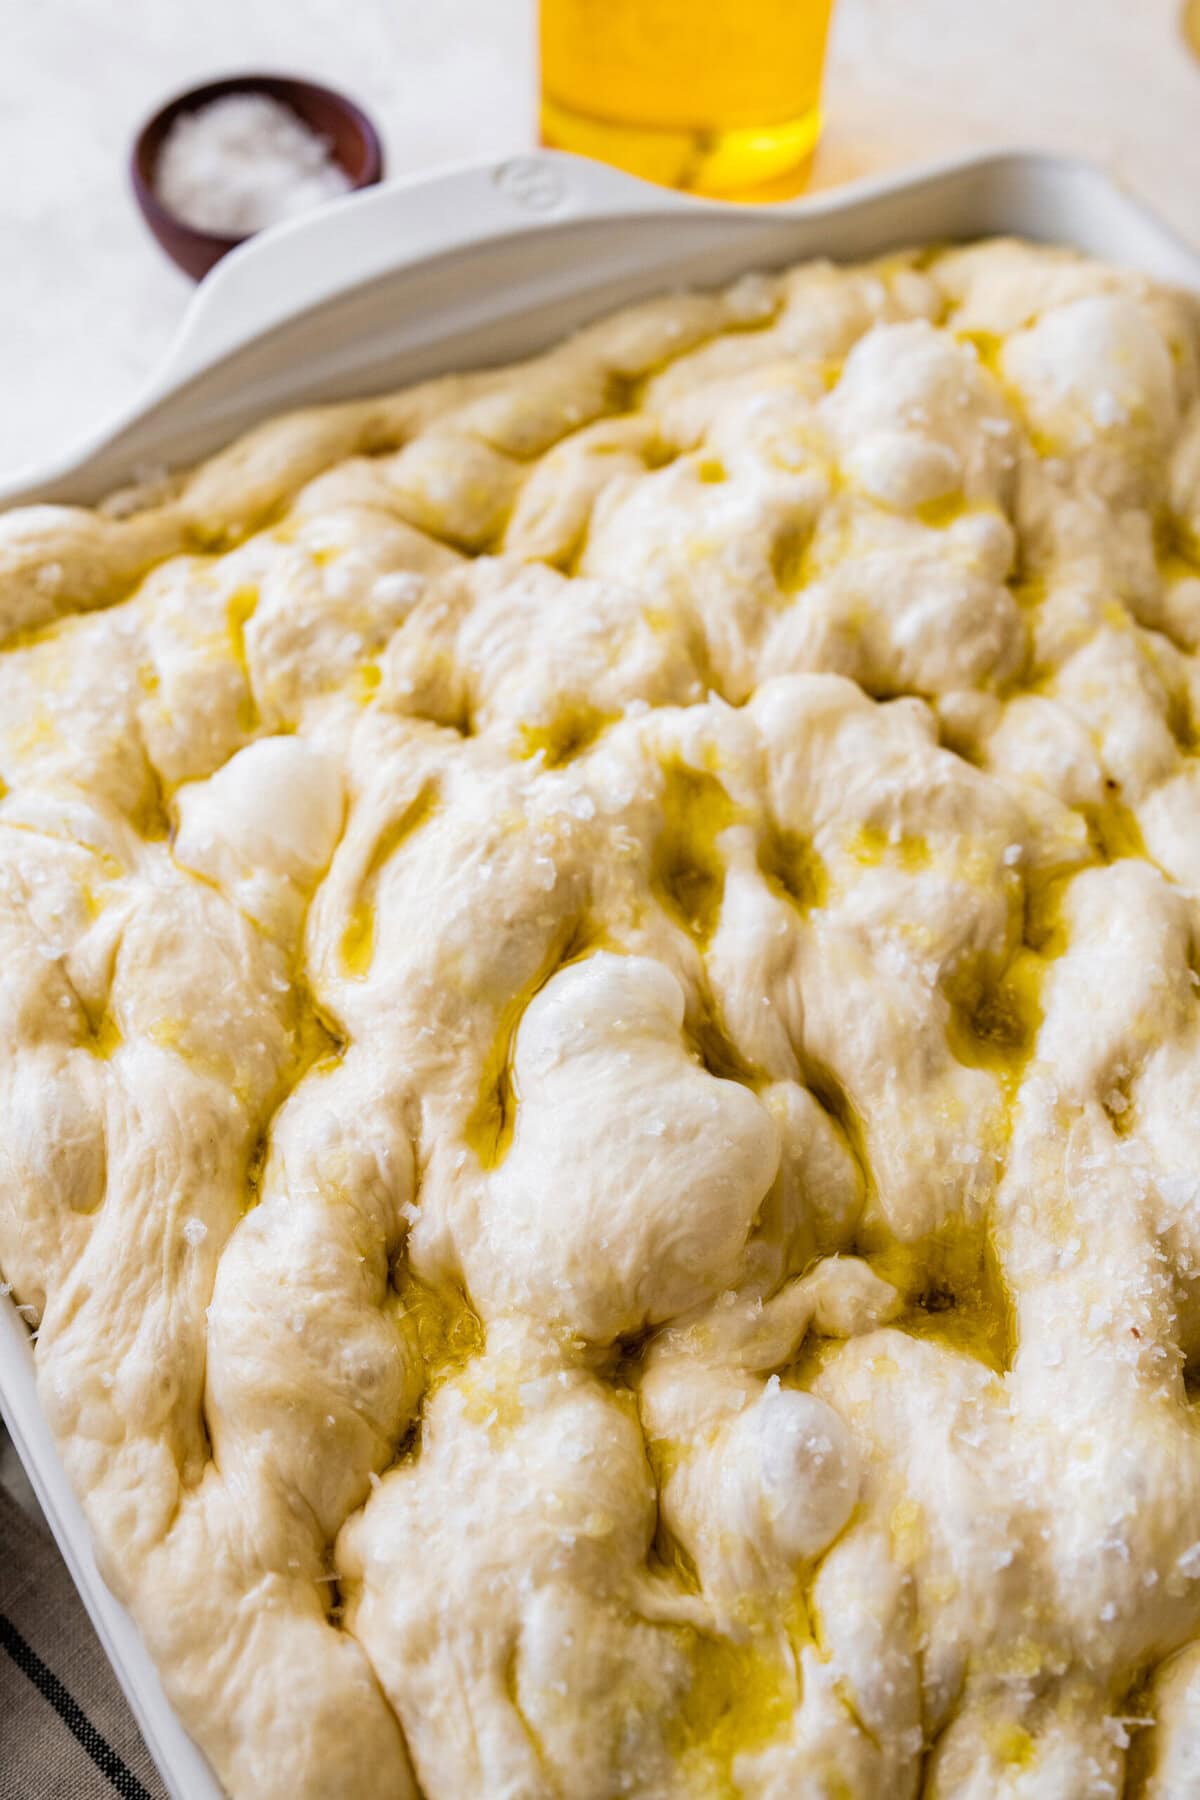 how to make no-knead focaccia bread step-by-step: dough with dimples. Ready to bake.